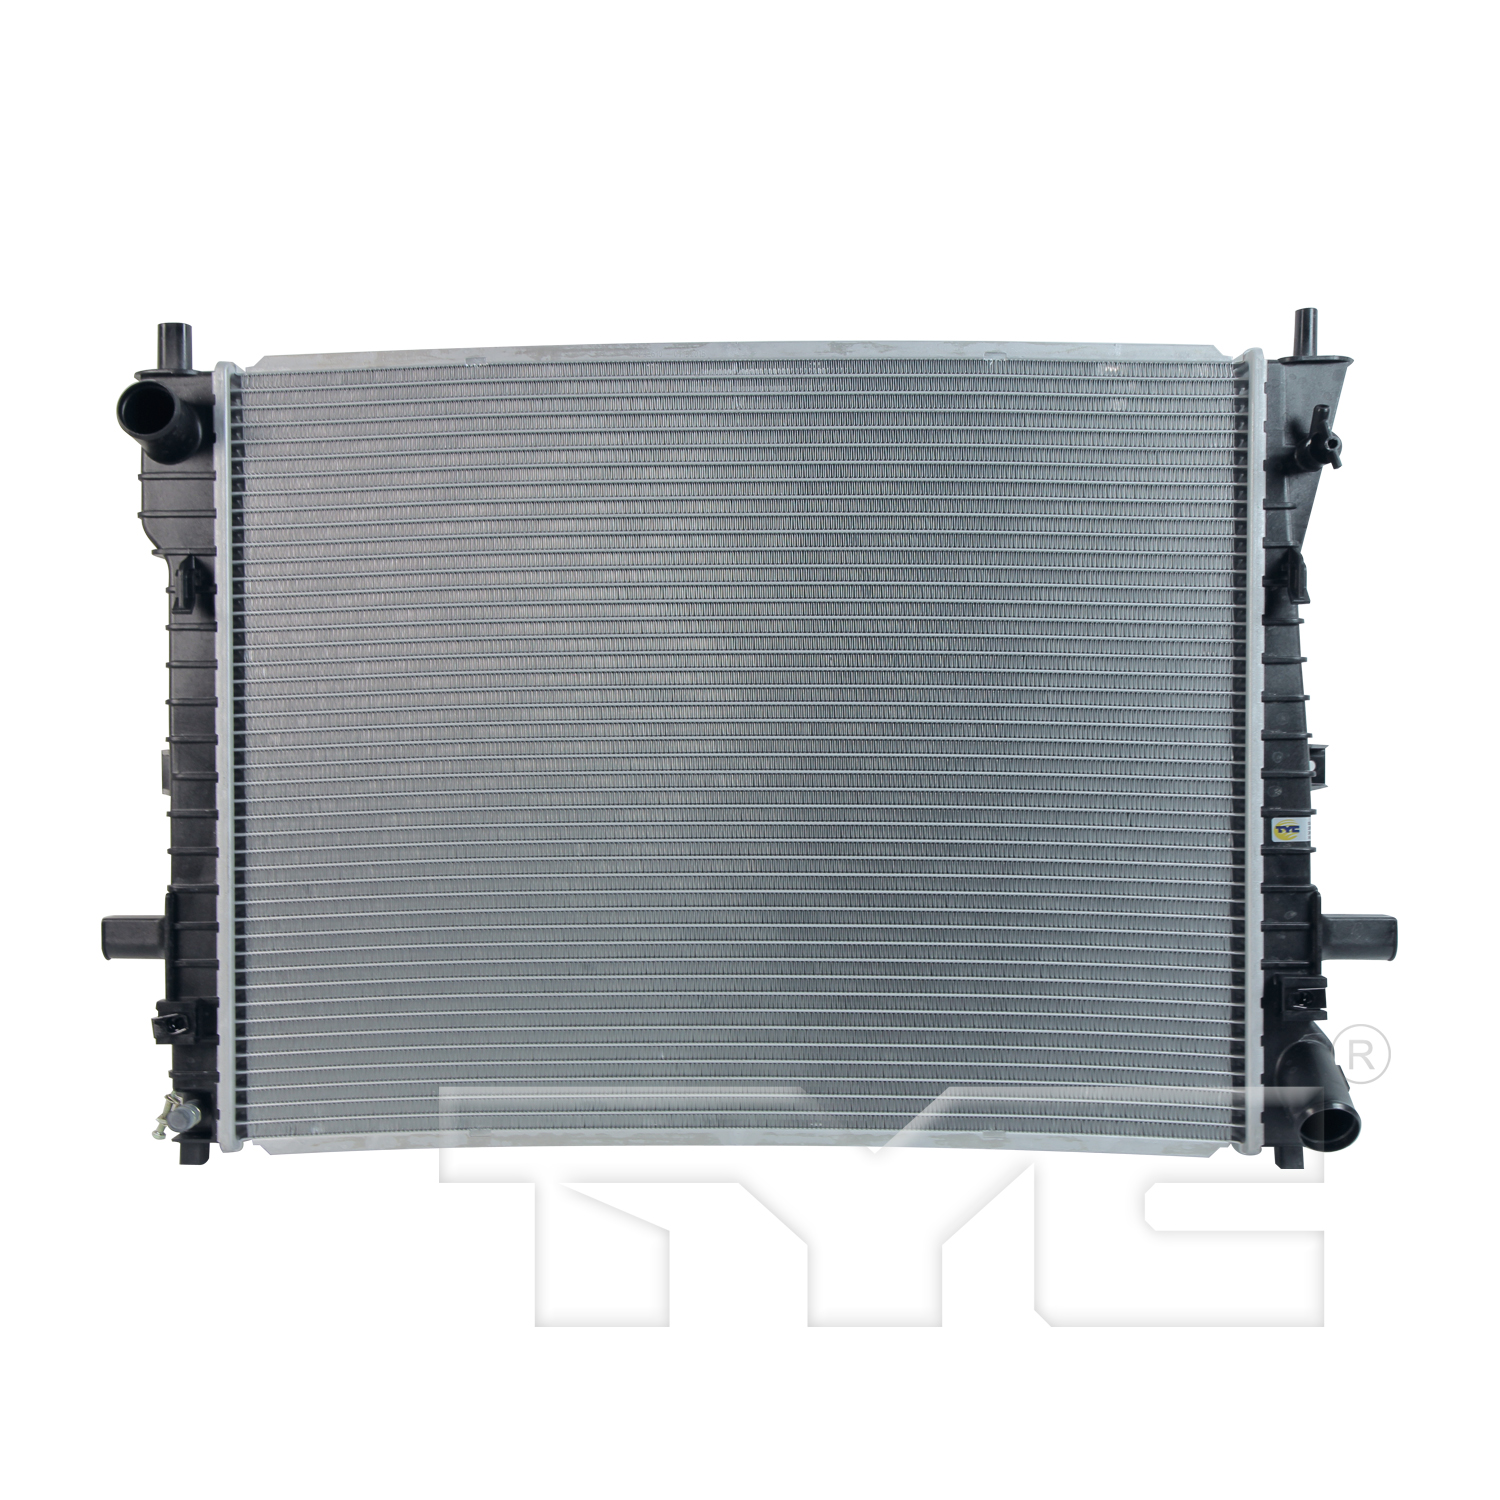 Aftermarket RADIATORS for FORD - CROWN VICTORIA, CROWN VICTORIA,03-05,Radiator assembly